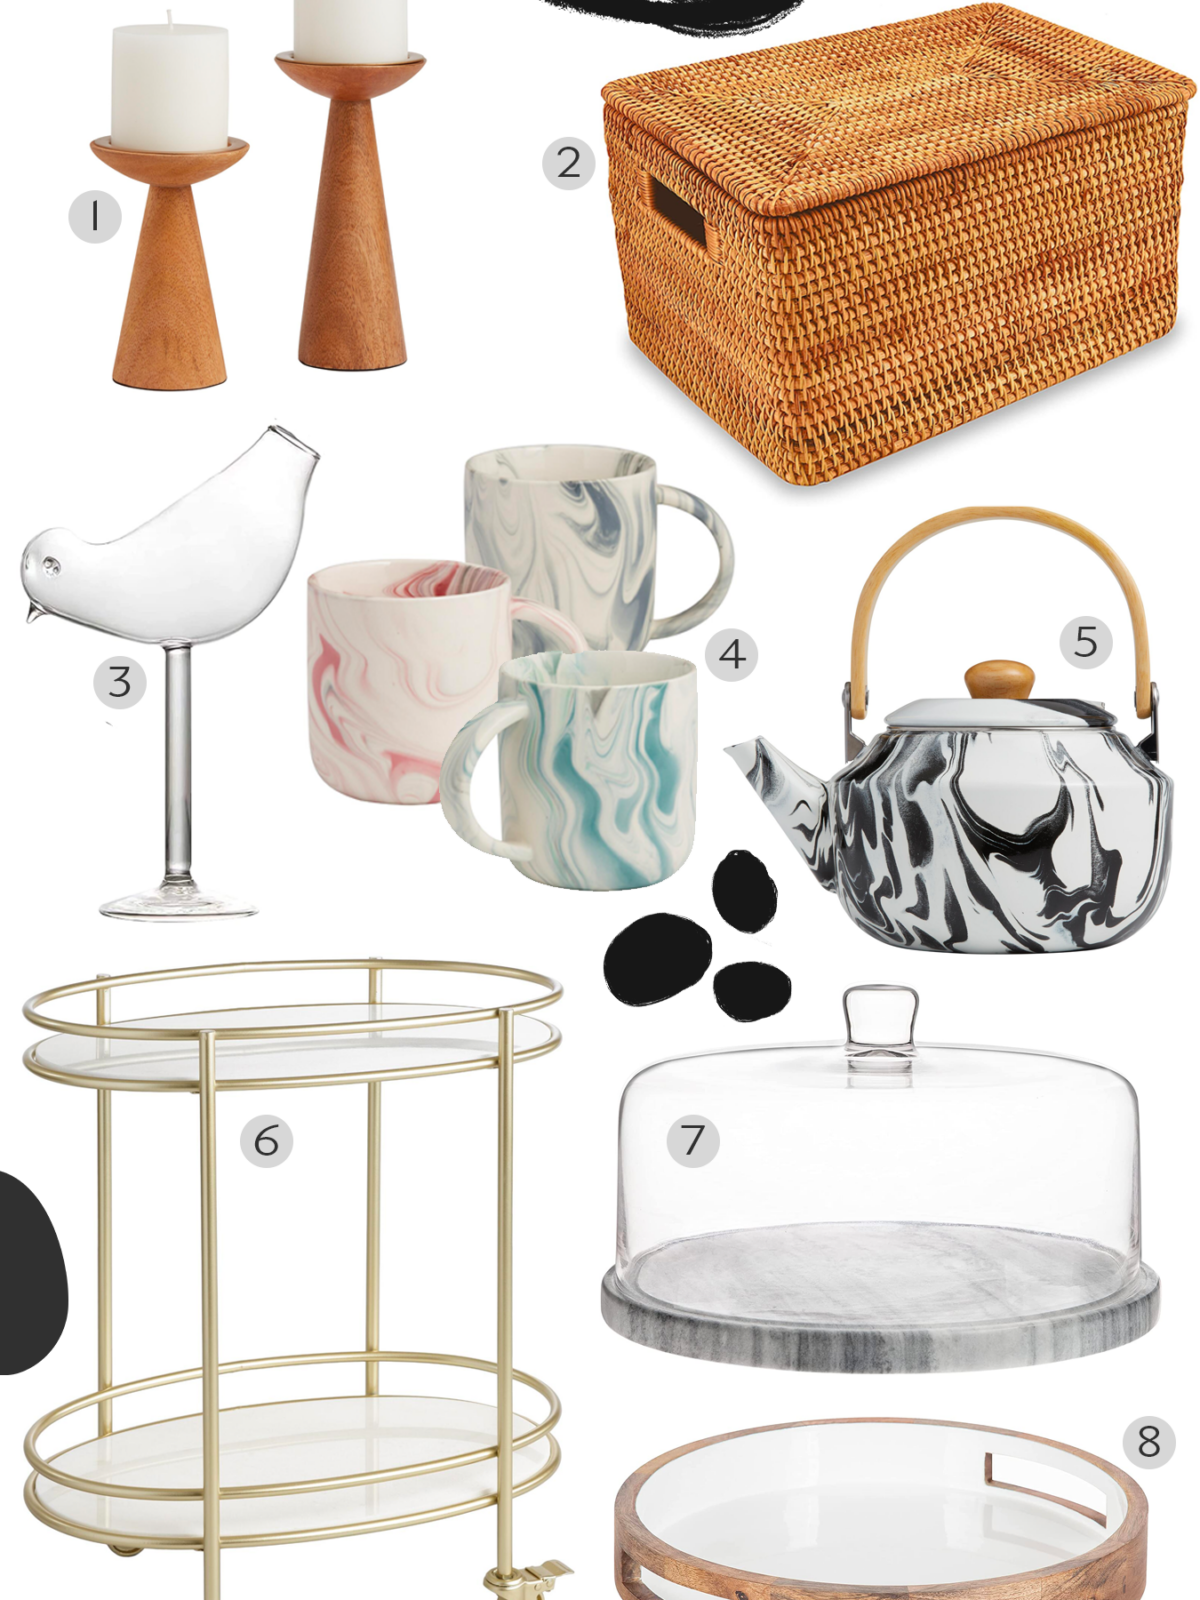 15 Very Chic Home Finds Under $100